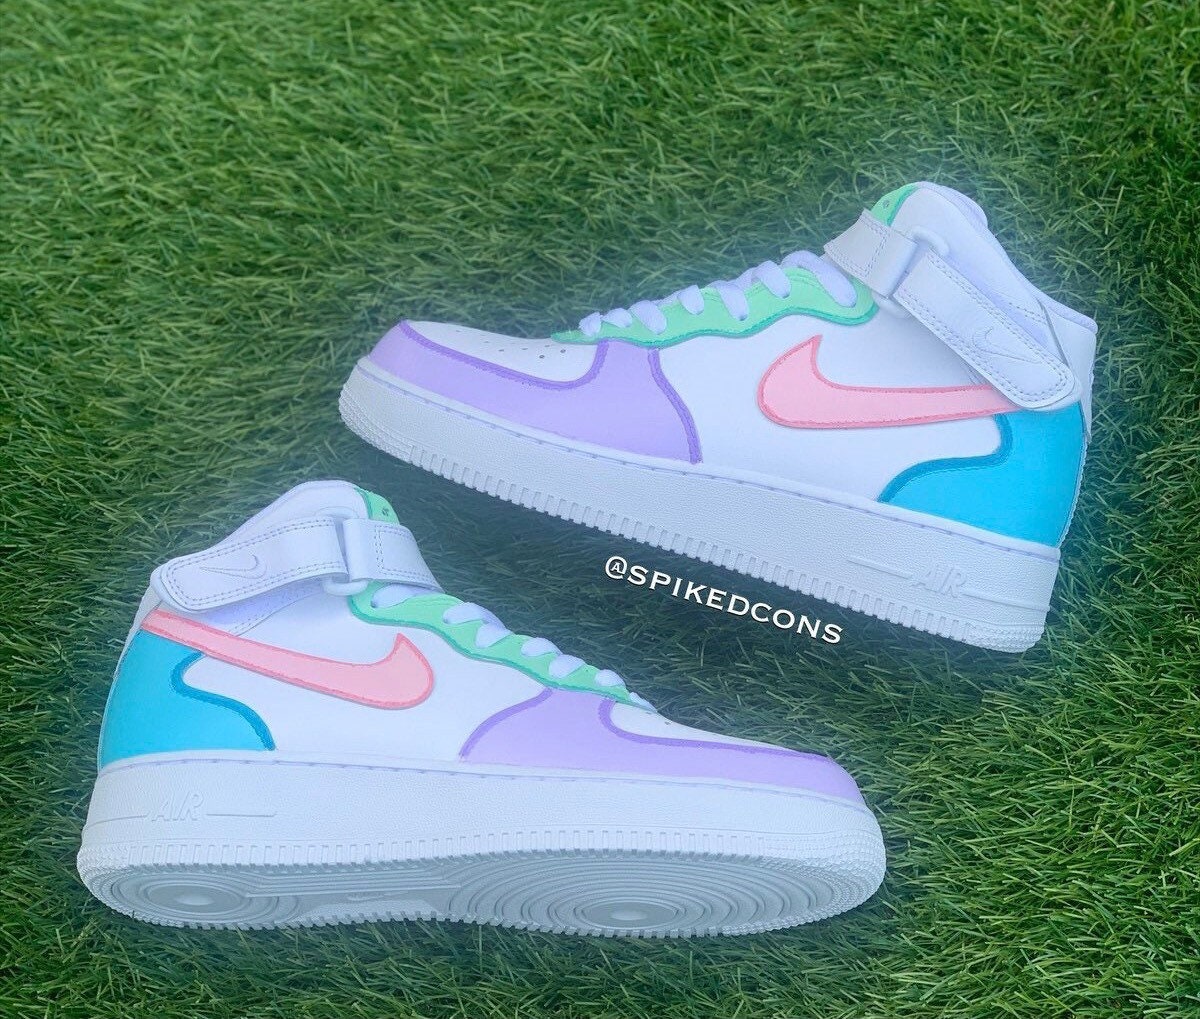 Cotton Candy Air Force 1 Air Force 1s Air Force 1 Pink Air 